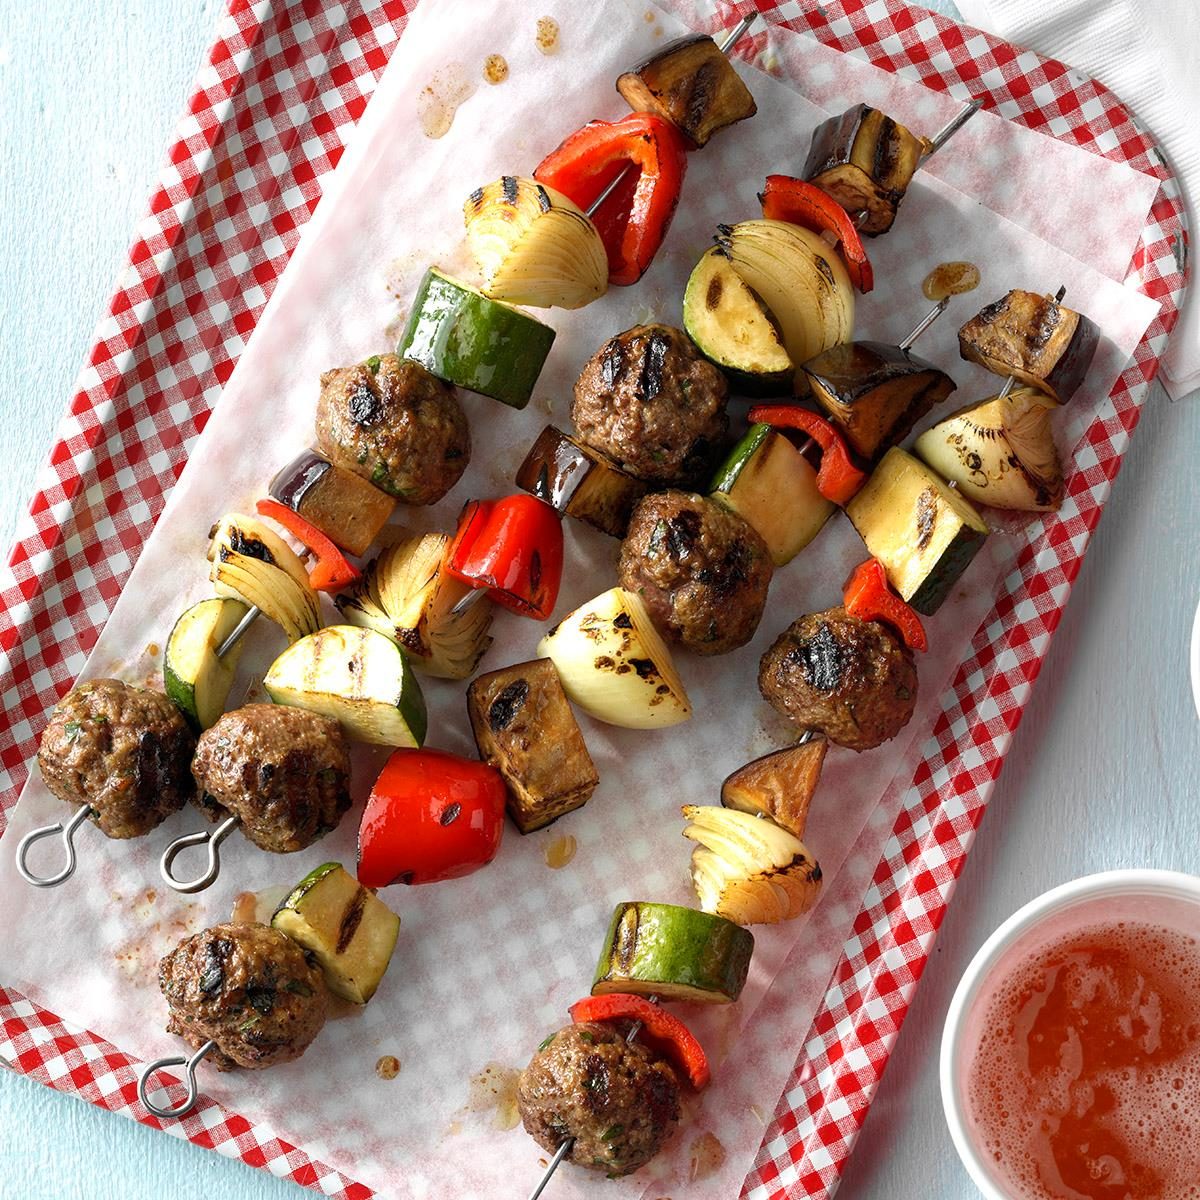 The Shish Kabob: Dinner on a Stick - Inspired - Hormel Foods